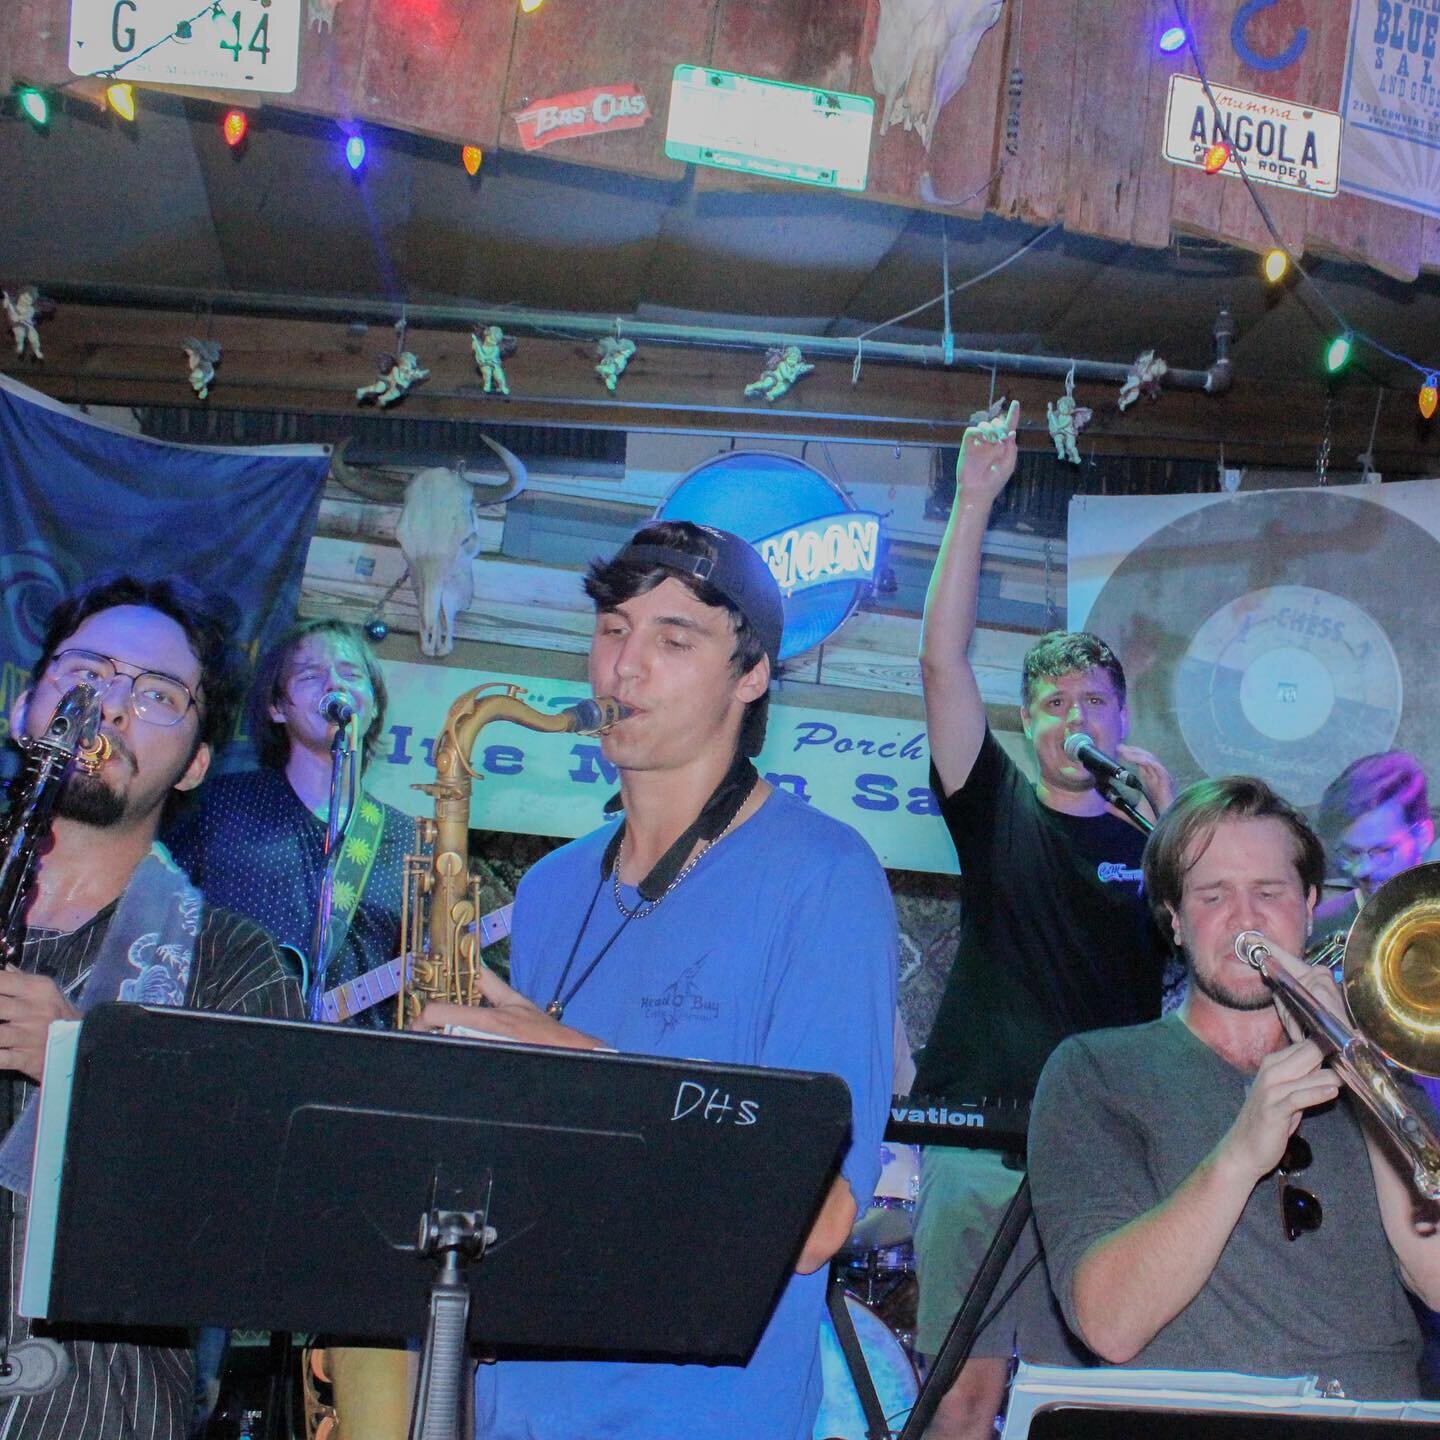 The Bagic BongoFish Back to School Bash is BACK for the 3rd time THIS SATURDAY at the Blue Moon Saloon! Even if you graduated years ago, come out and relive your glory days with us and the legendary Bad Bongo boys! Bring your UL ID for a discount at 